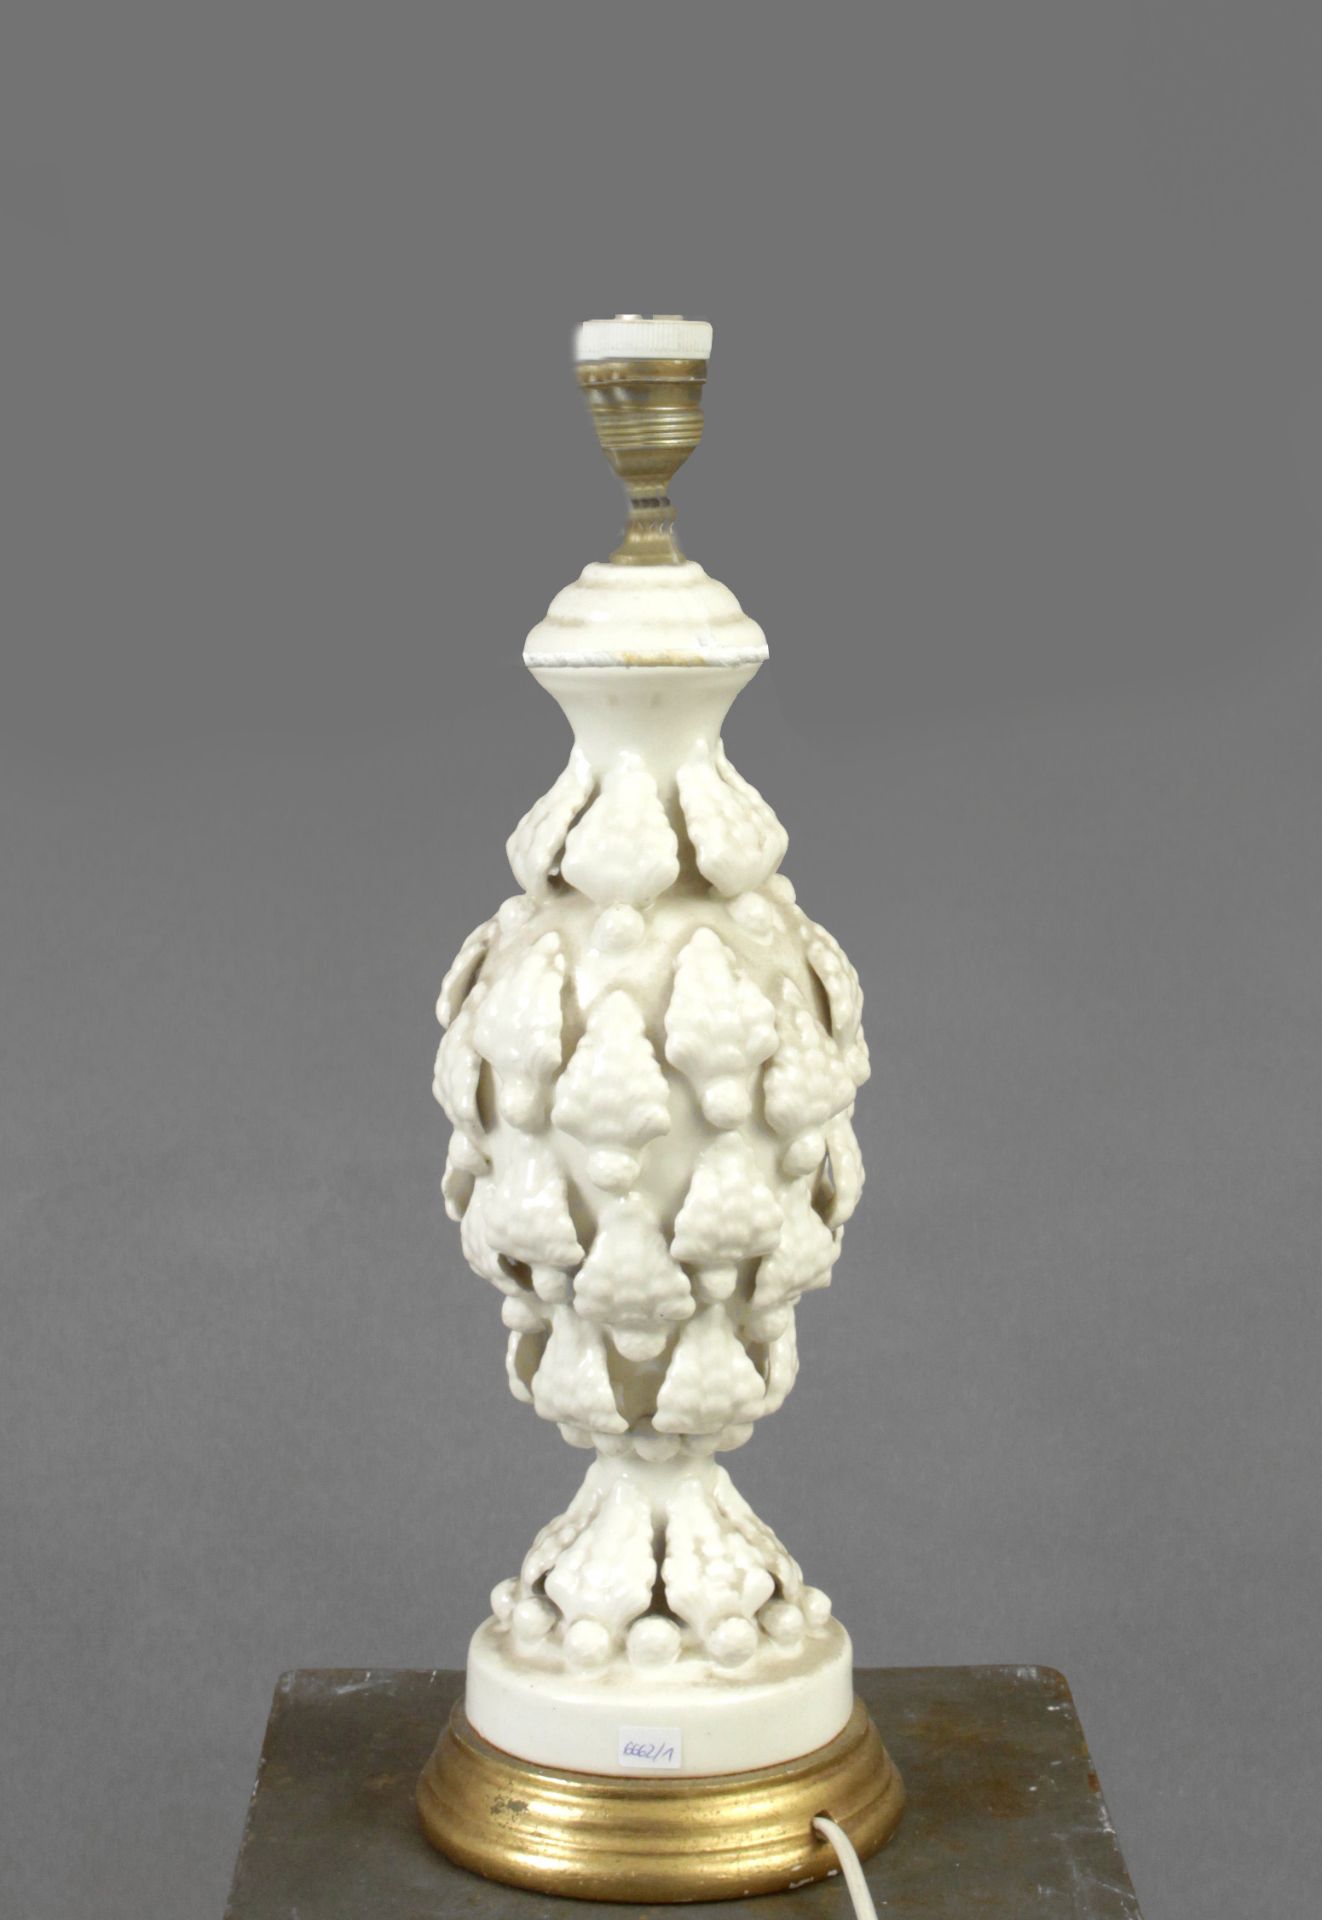 A mid 20th century table lamp in Manises porcelain